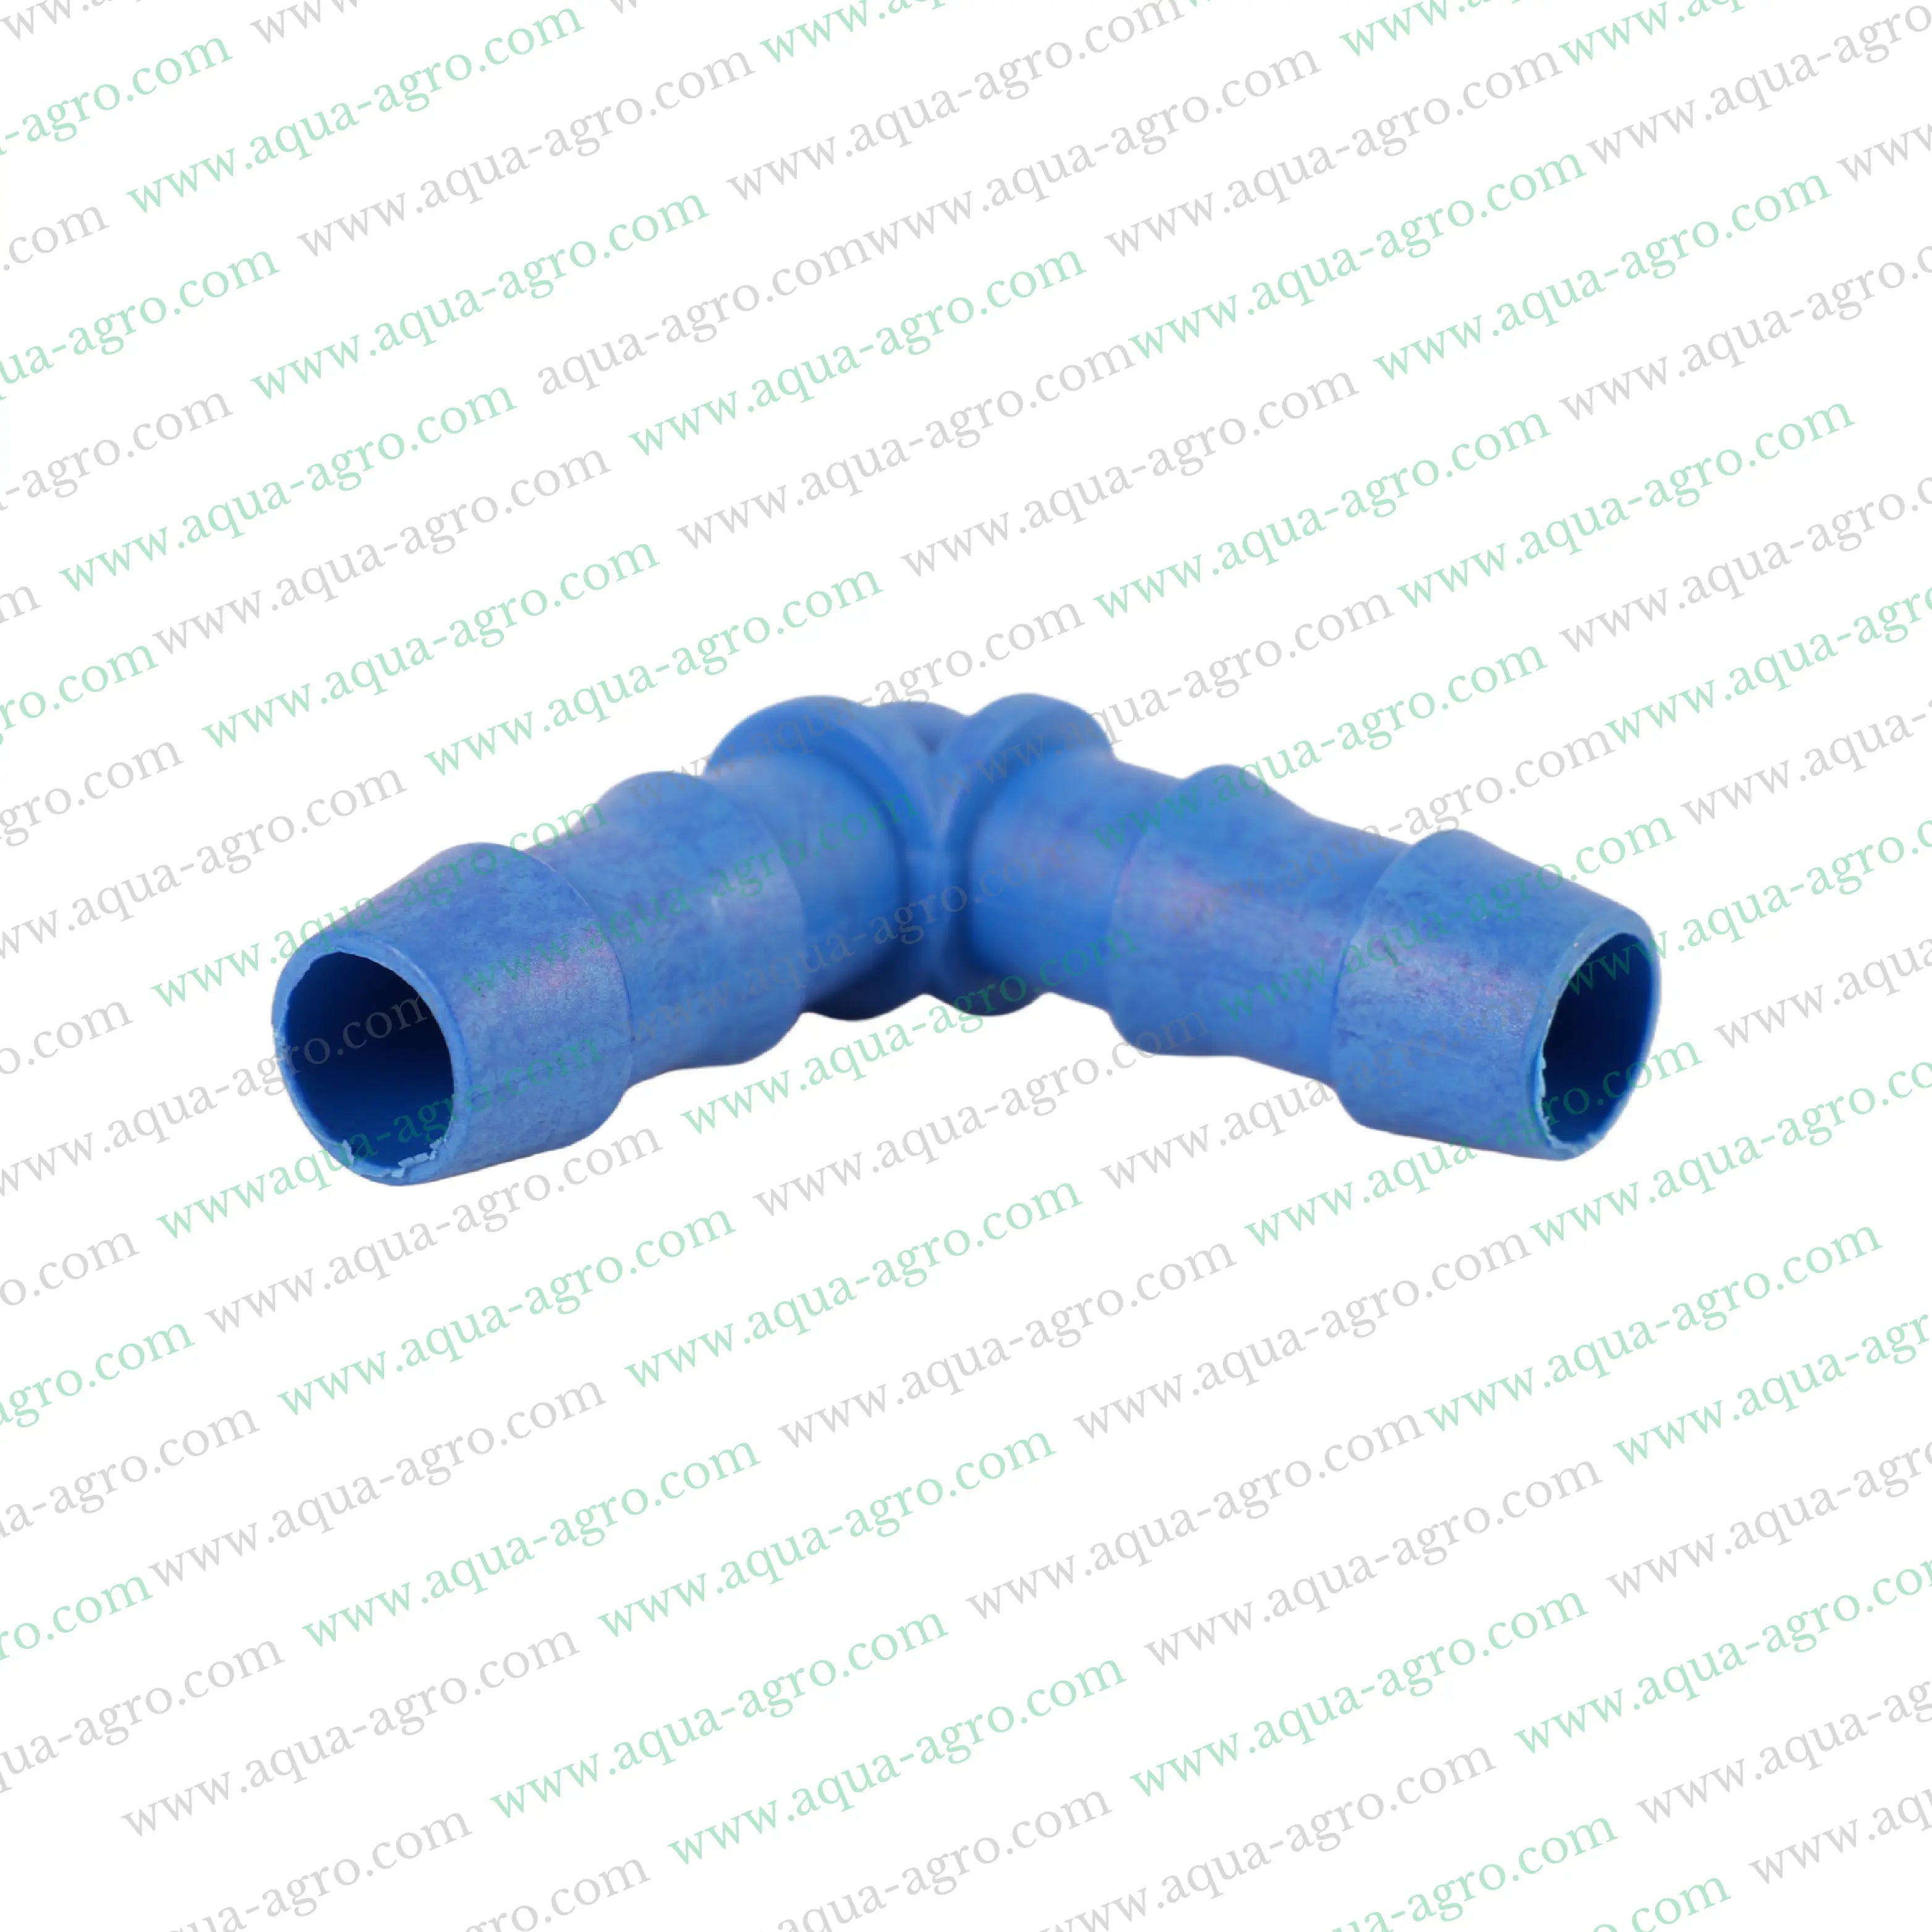 AQUA - AGRO | Drip Fittings And Accessories - Barbed Fittings - Lite - Elbow - 12mm